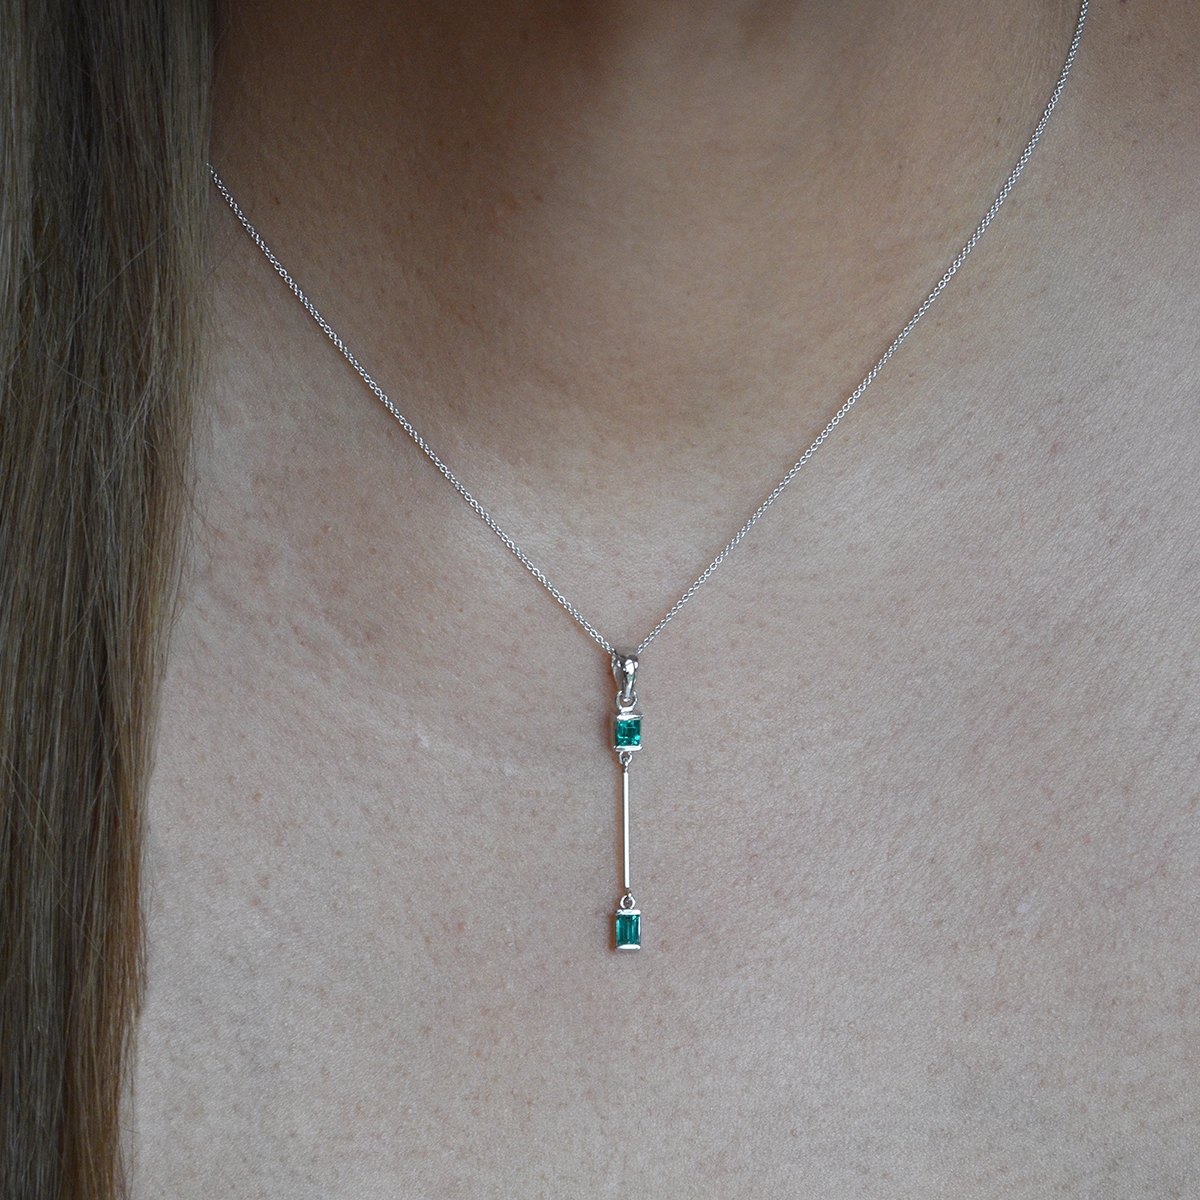 Thin emerald necklace on models neck with small emerald cut emeralds in a delicate half bezel setting